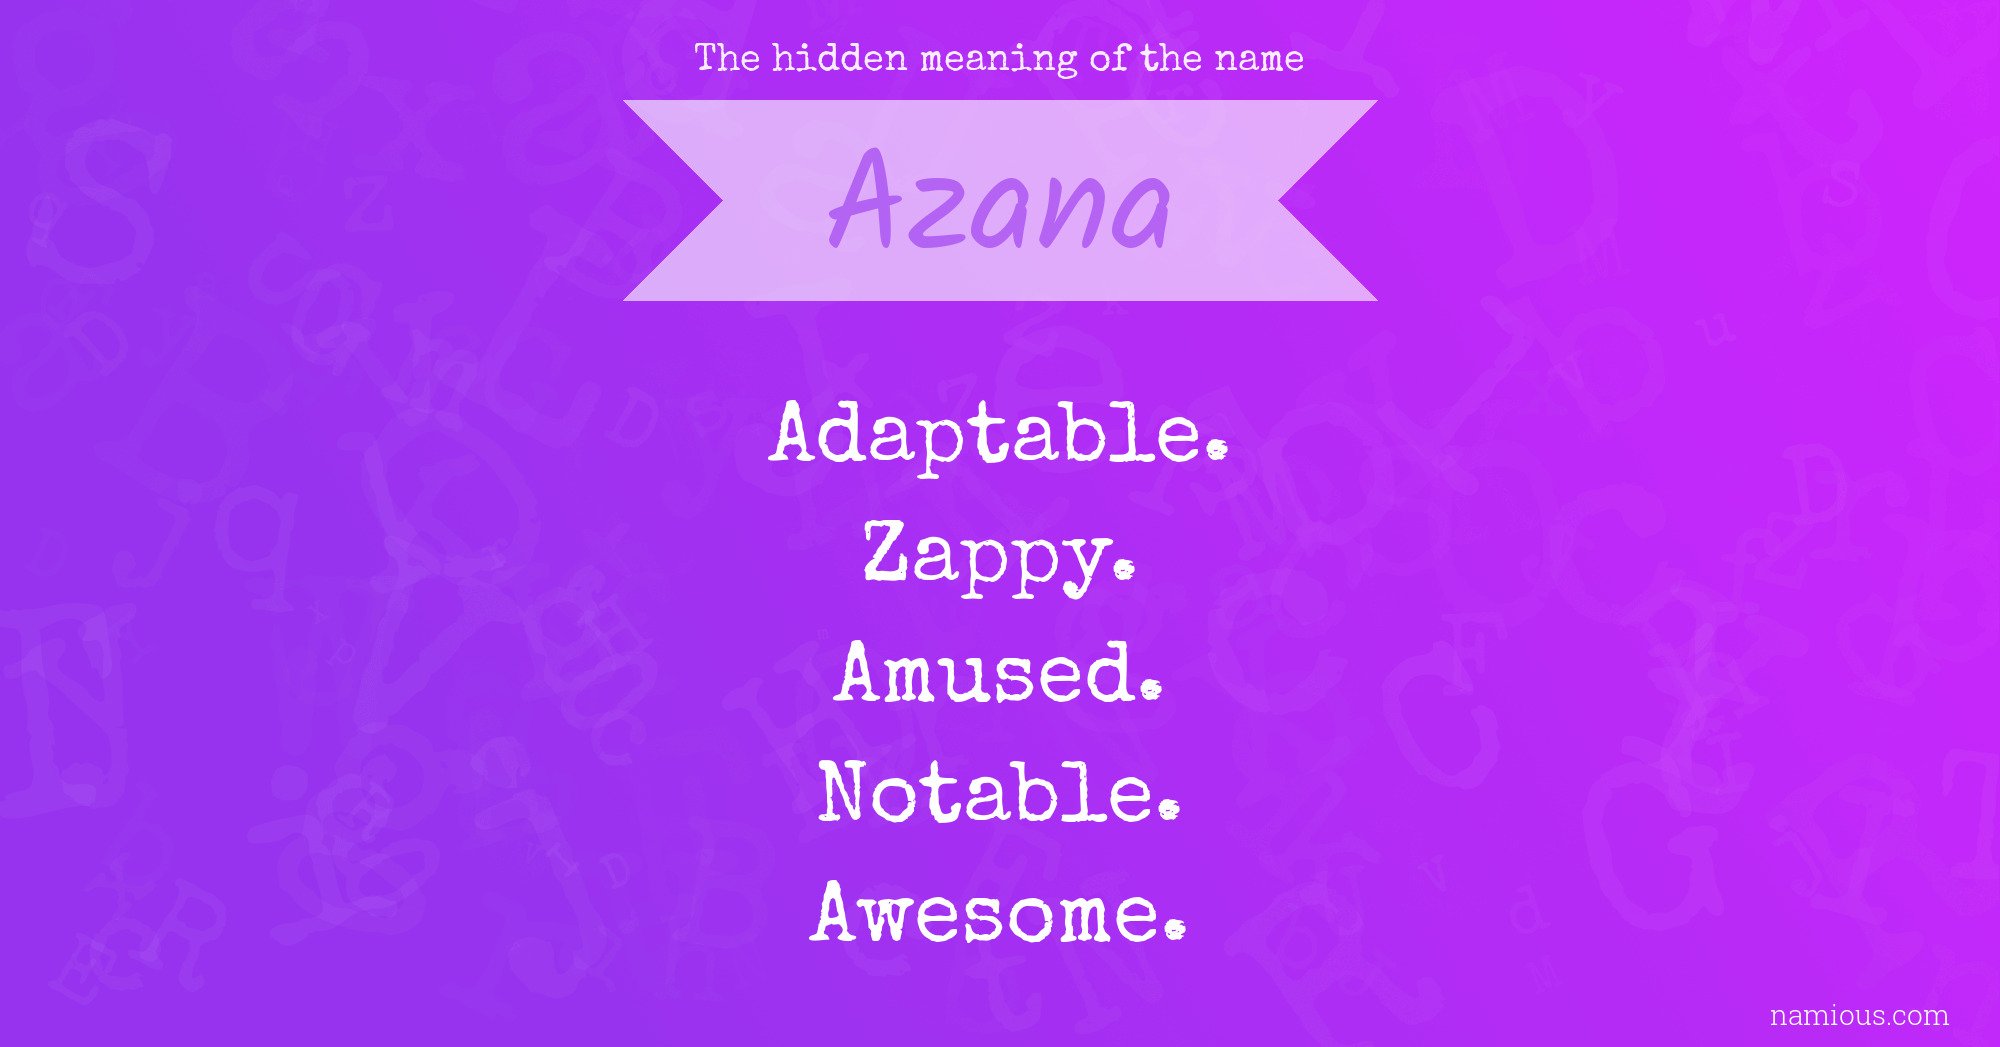 The hidden meaning of the name Azana